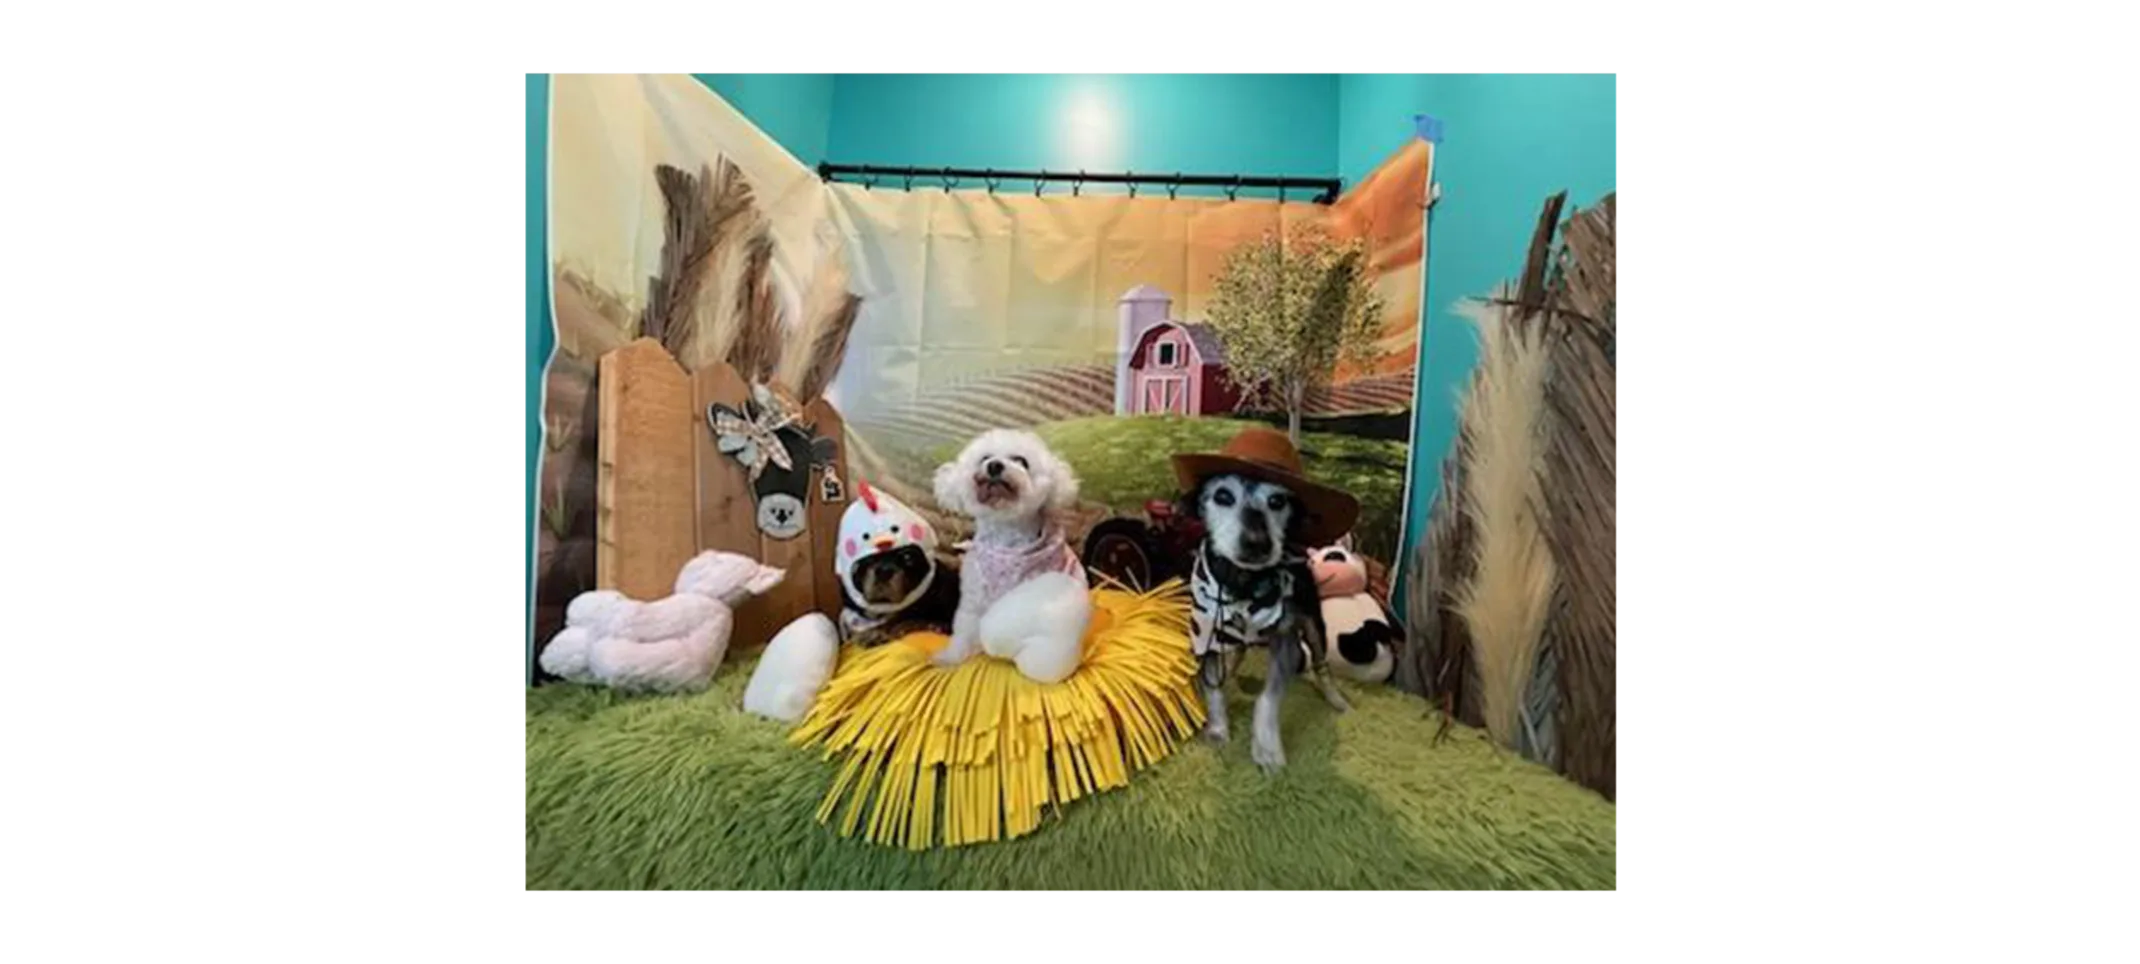 Dogs dressed up in farm gear posing in front of barn backdrop